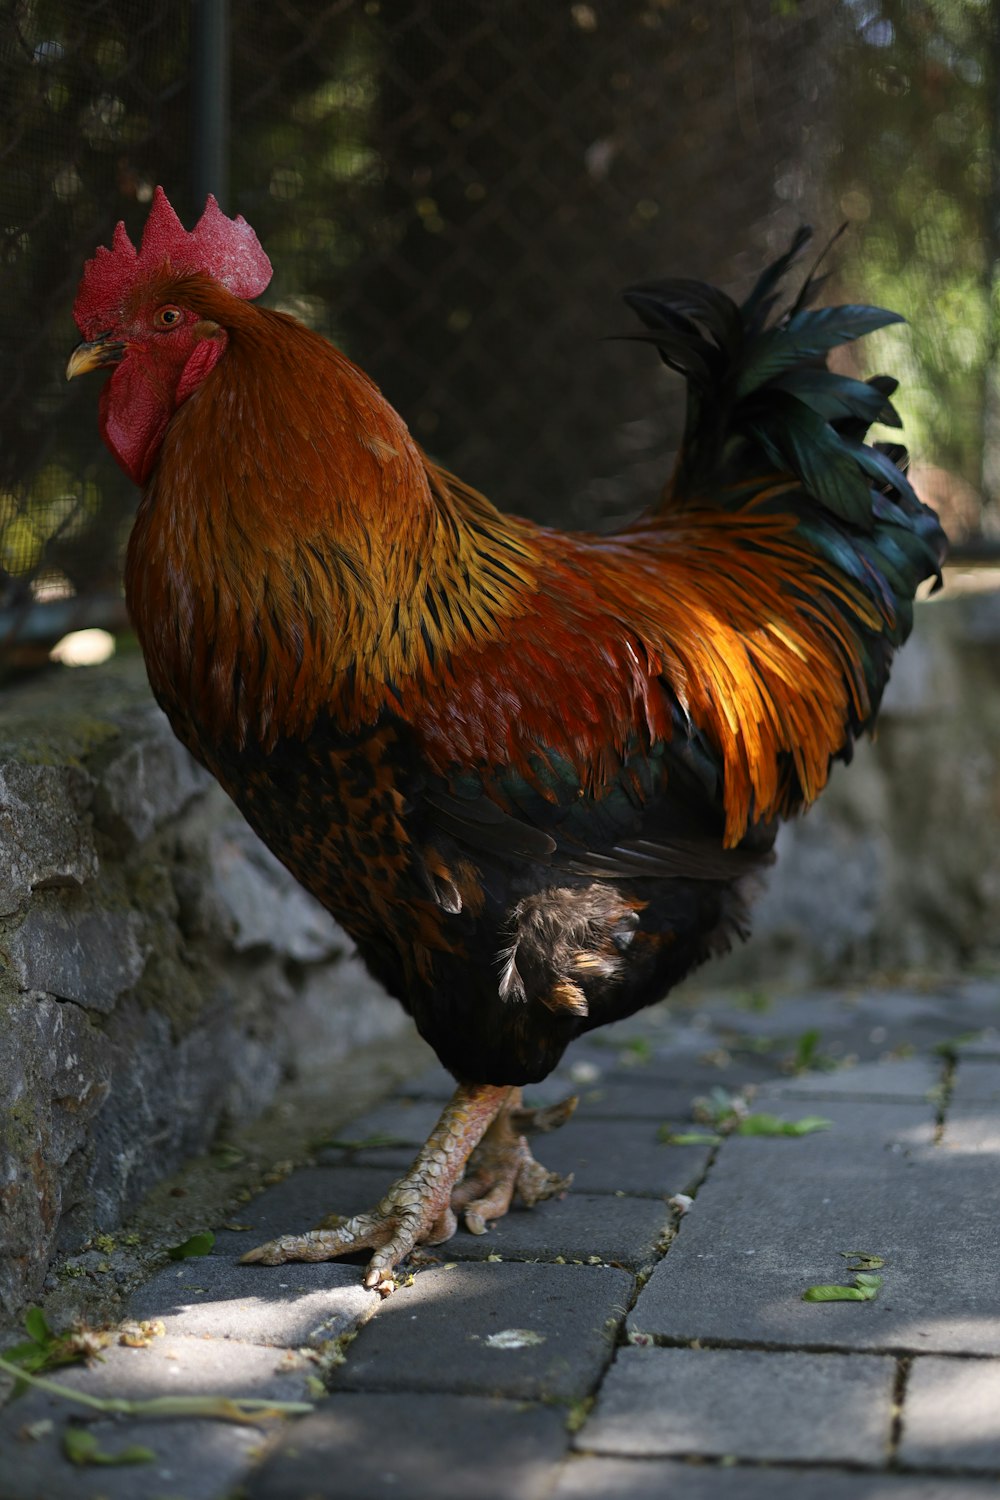 a rooster is standing on a brick walkway